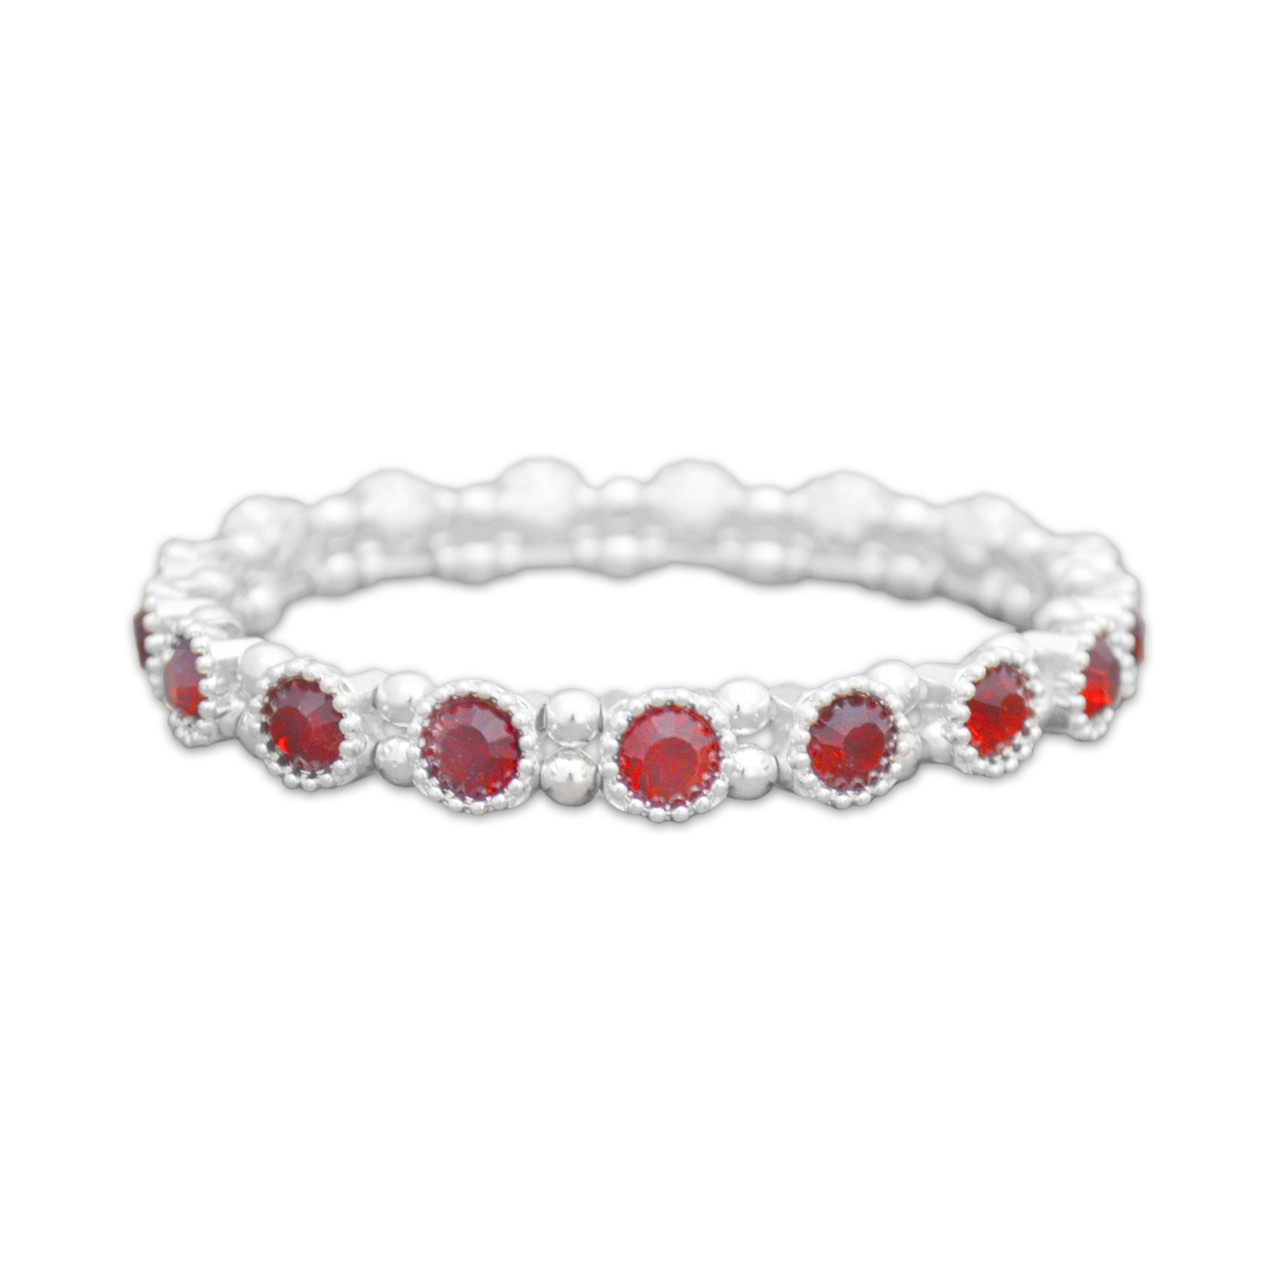 Tennis Bracelet Collection (24 pieces + FREE Display)